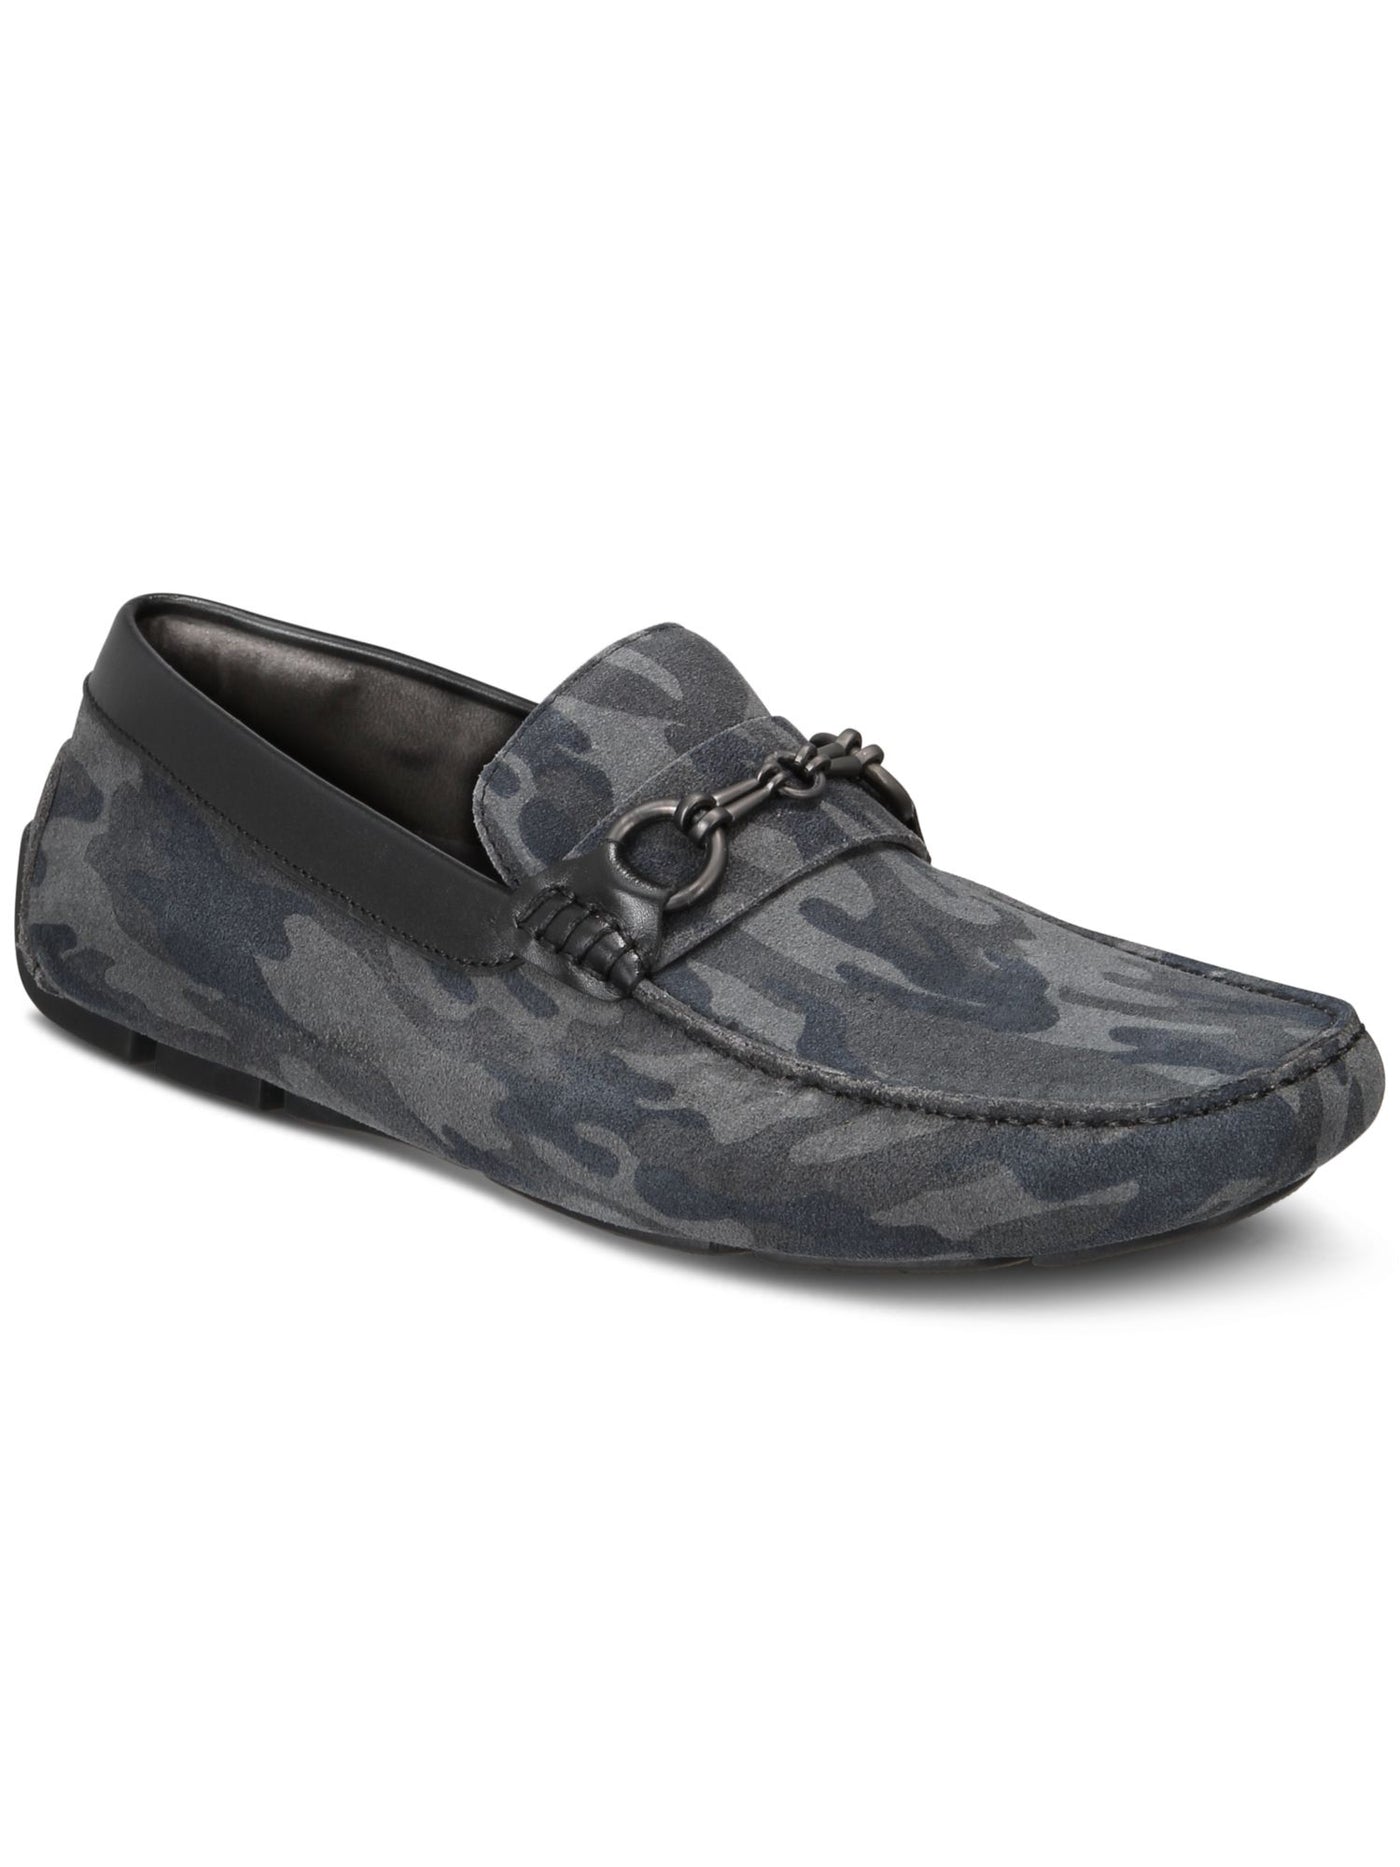 KENNETH COLE NEW YORK Mens Black Camo Gray Camouflage Bit Detail Hardware Topstitch Cushioned Removable Insole Theme Square Toe Slip On Leather Loafers Shoes 10.5